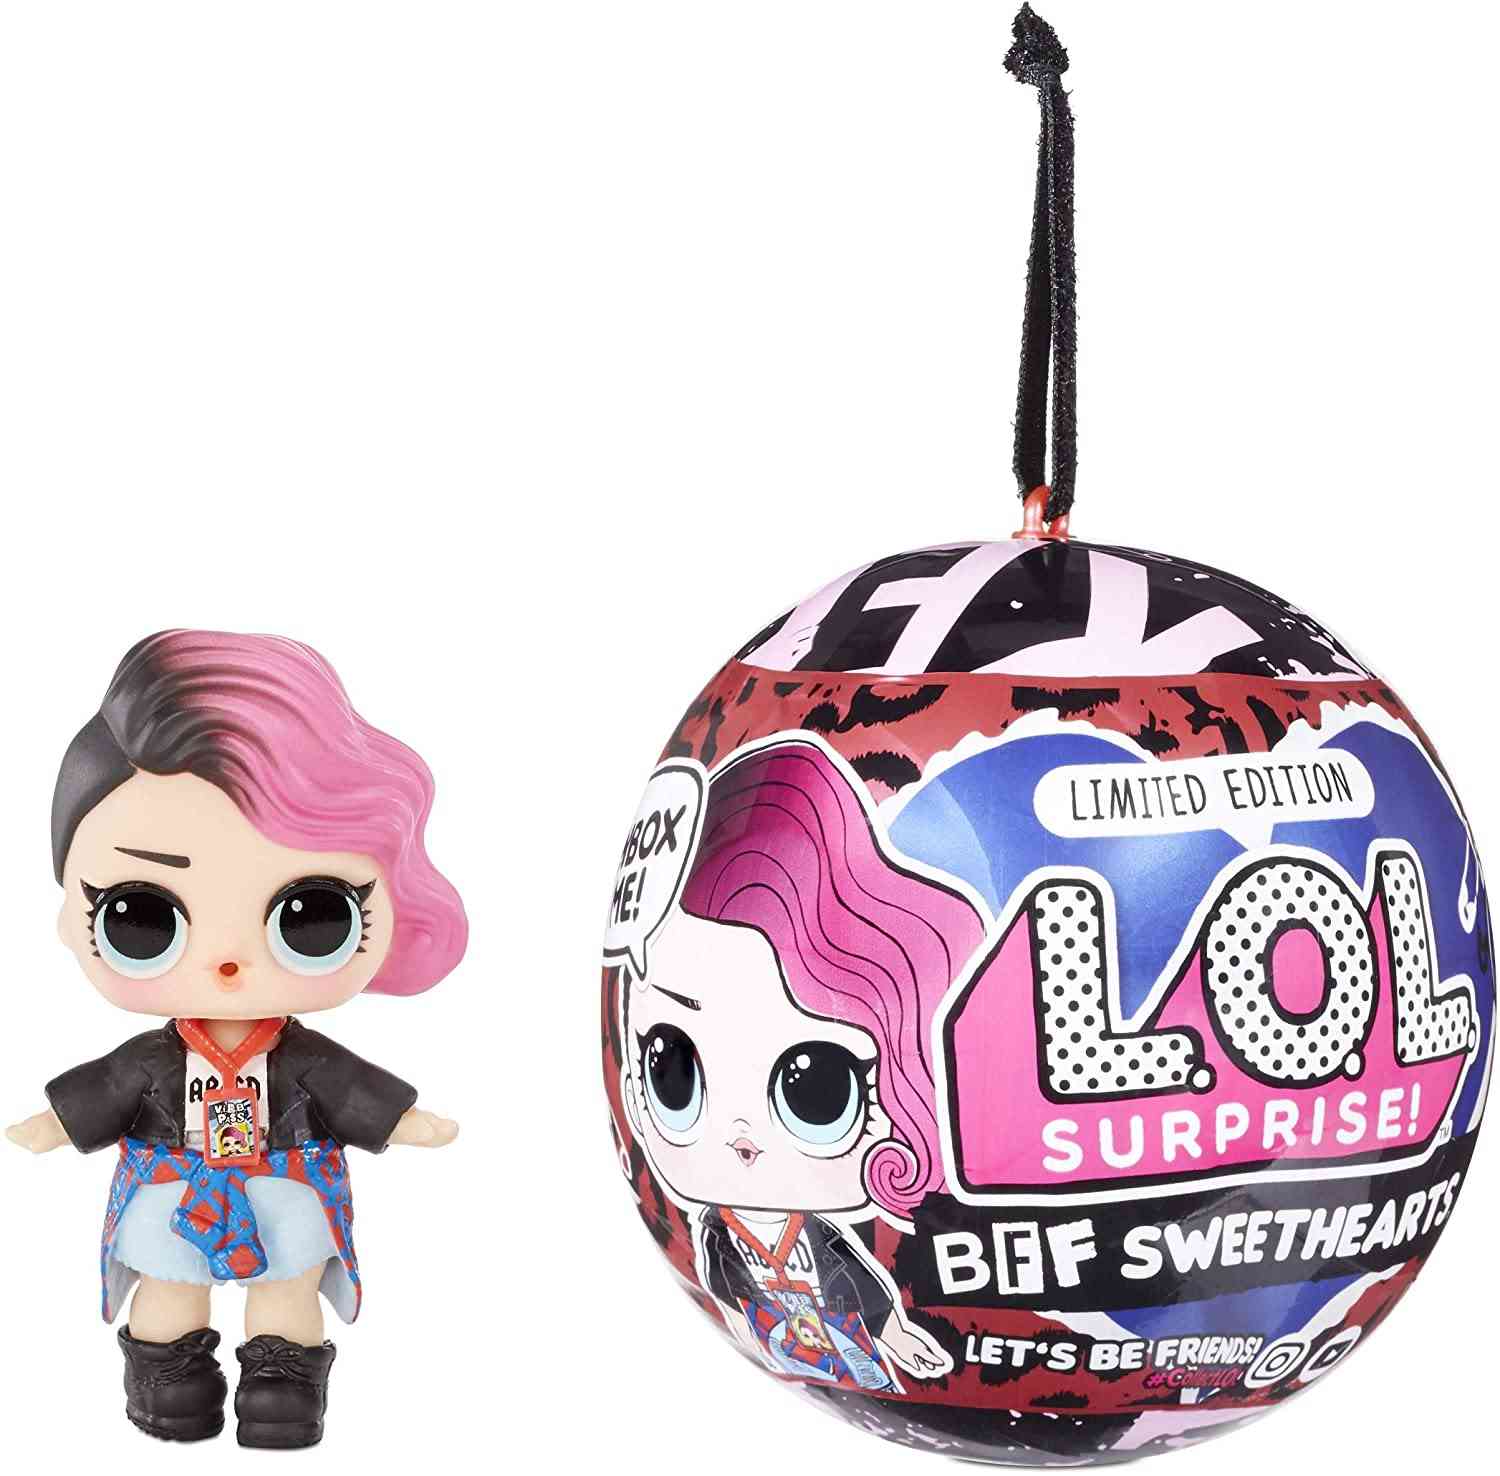 Surprise Sweethearts Rocker Doll With 7 Surprises